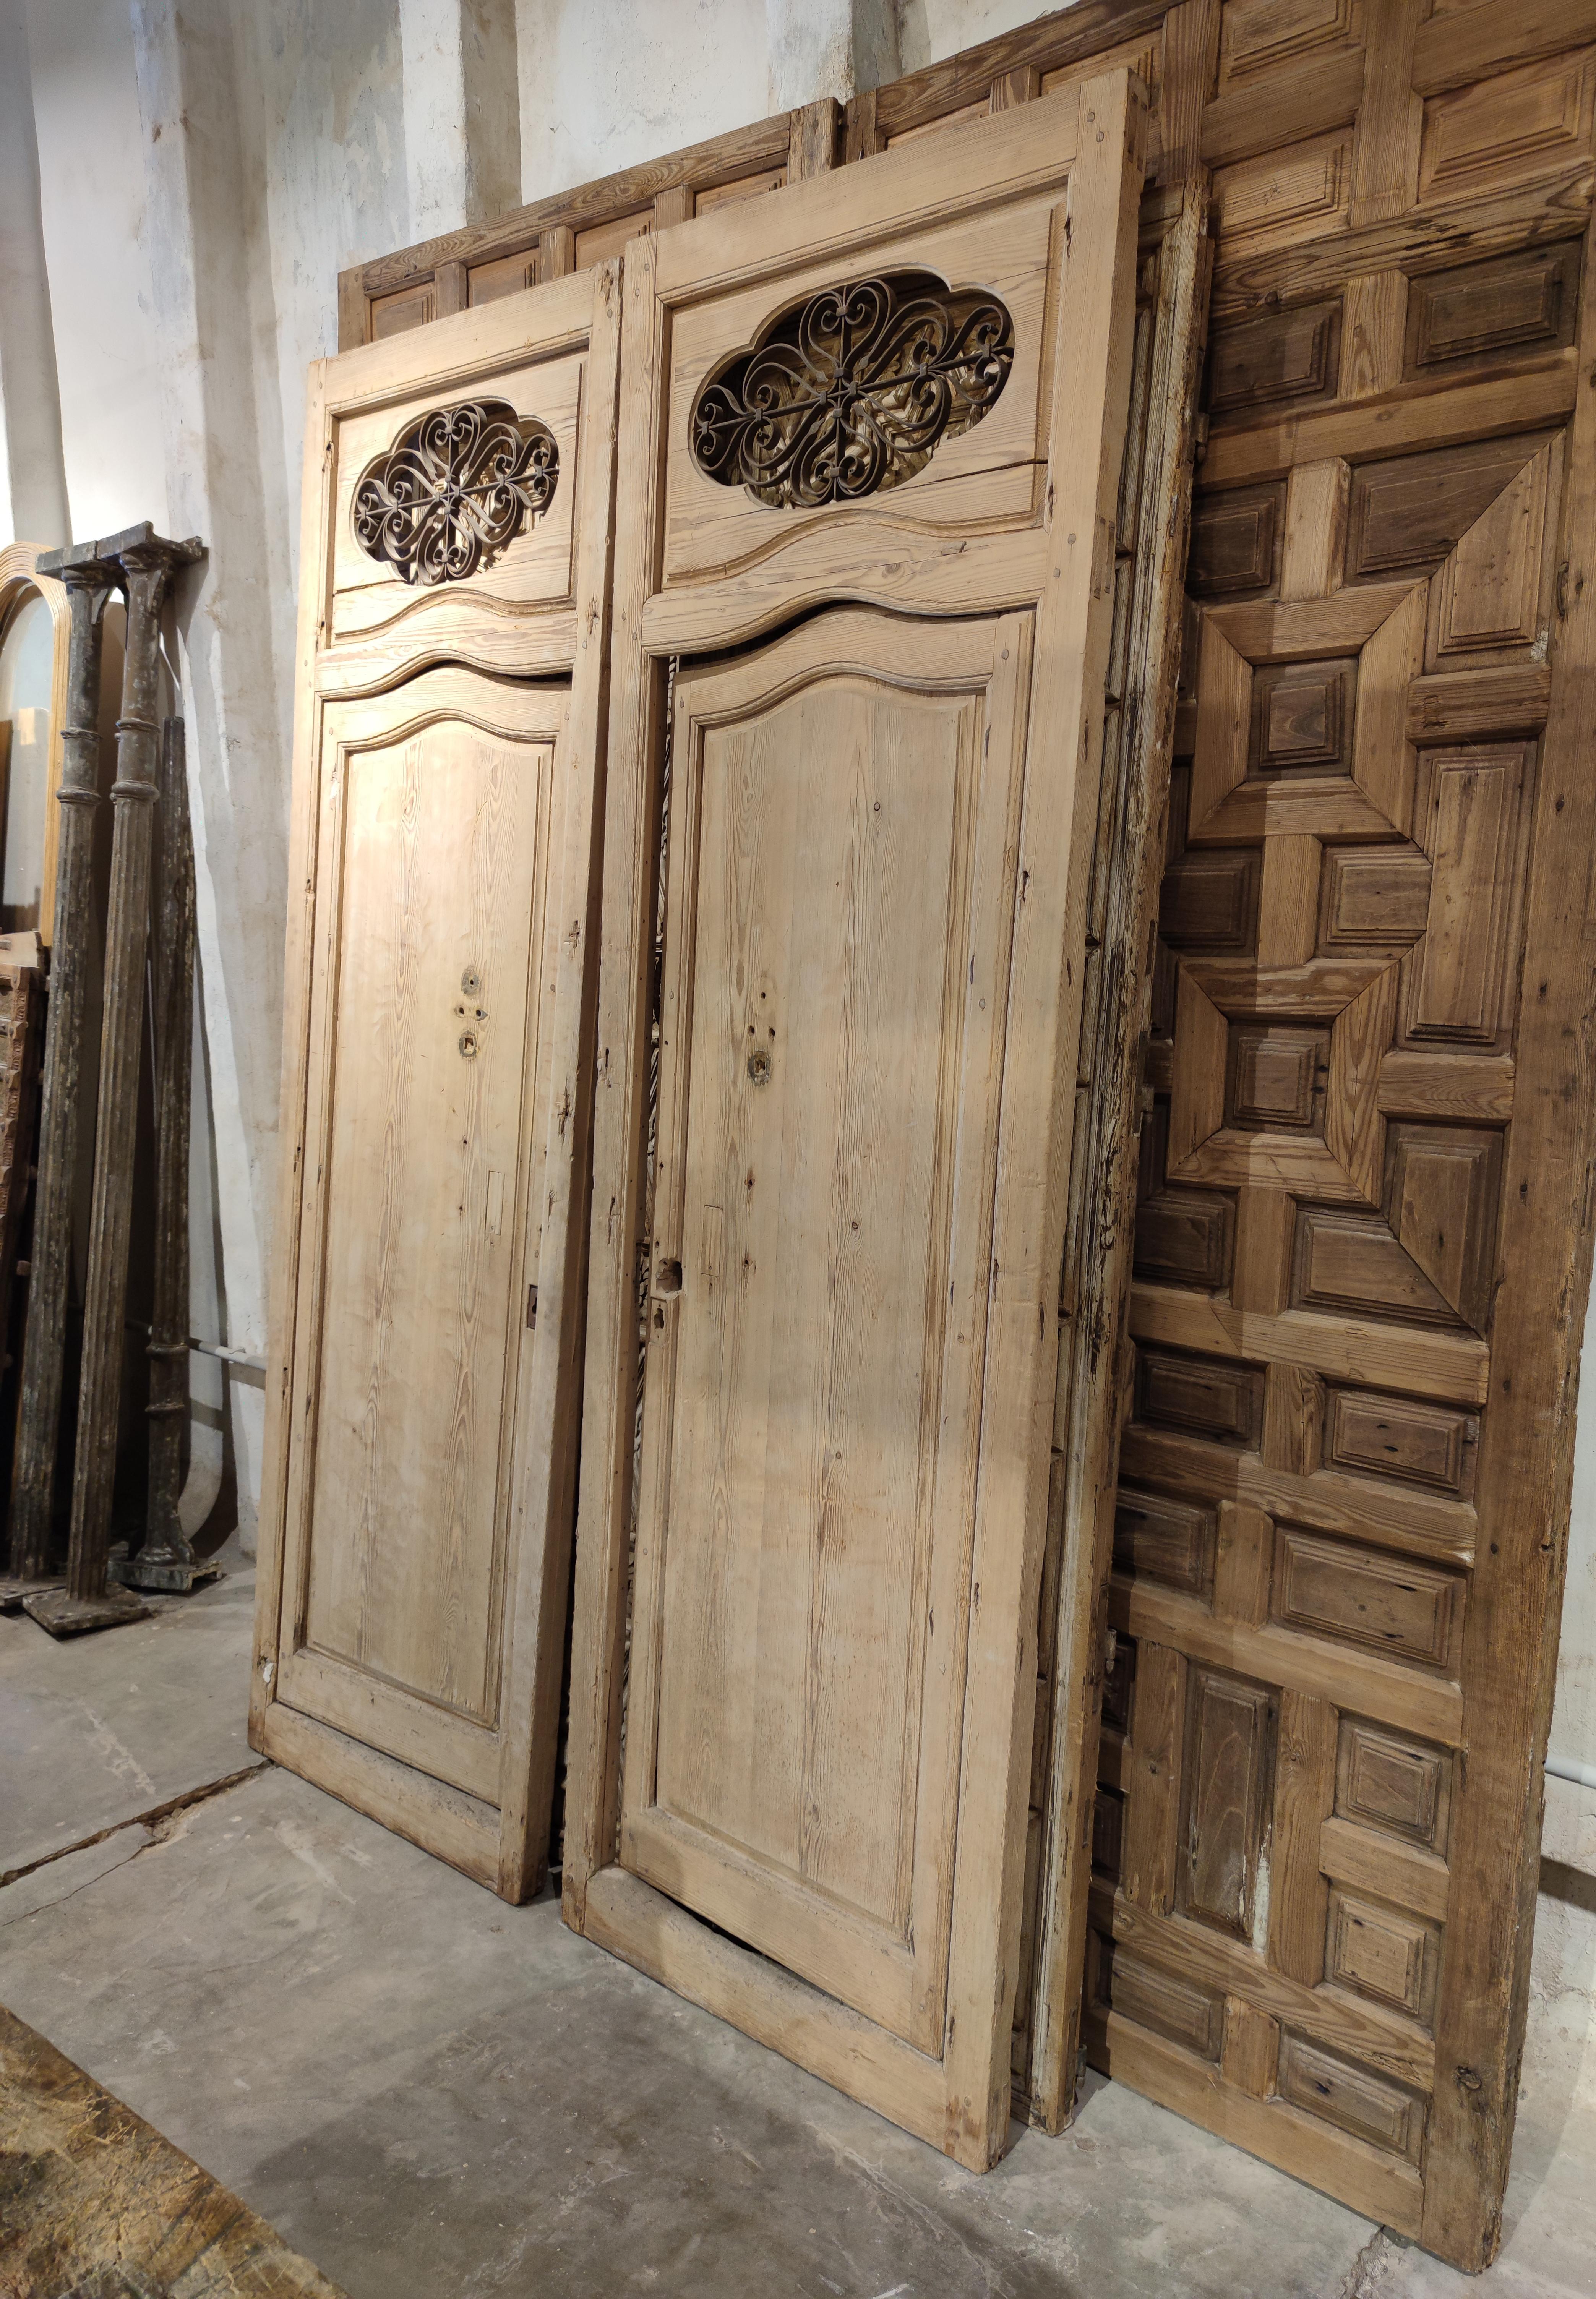 Antique 19th century Spanish Andalusian two panel double door with wrought iron decorative grille atop.

Dimensions correspond to each door panel.

 